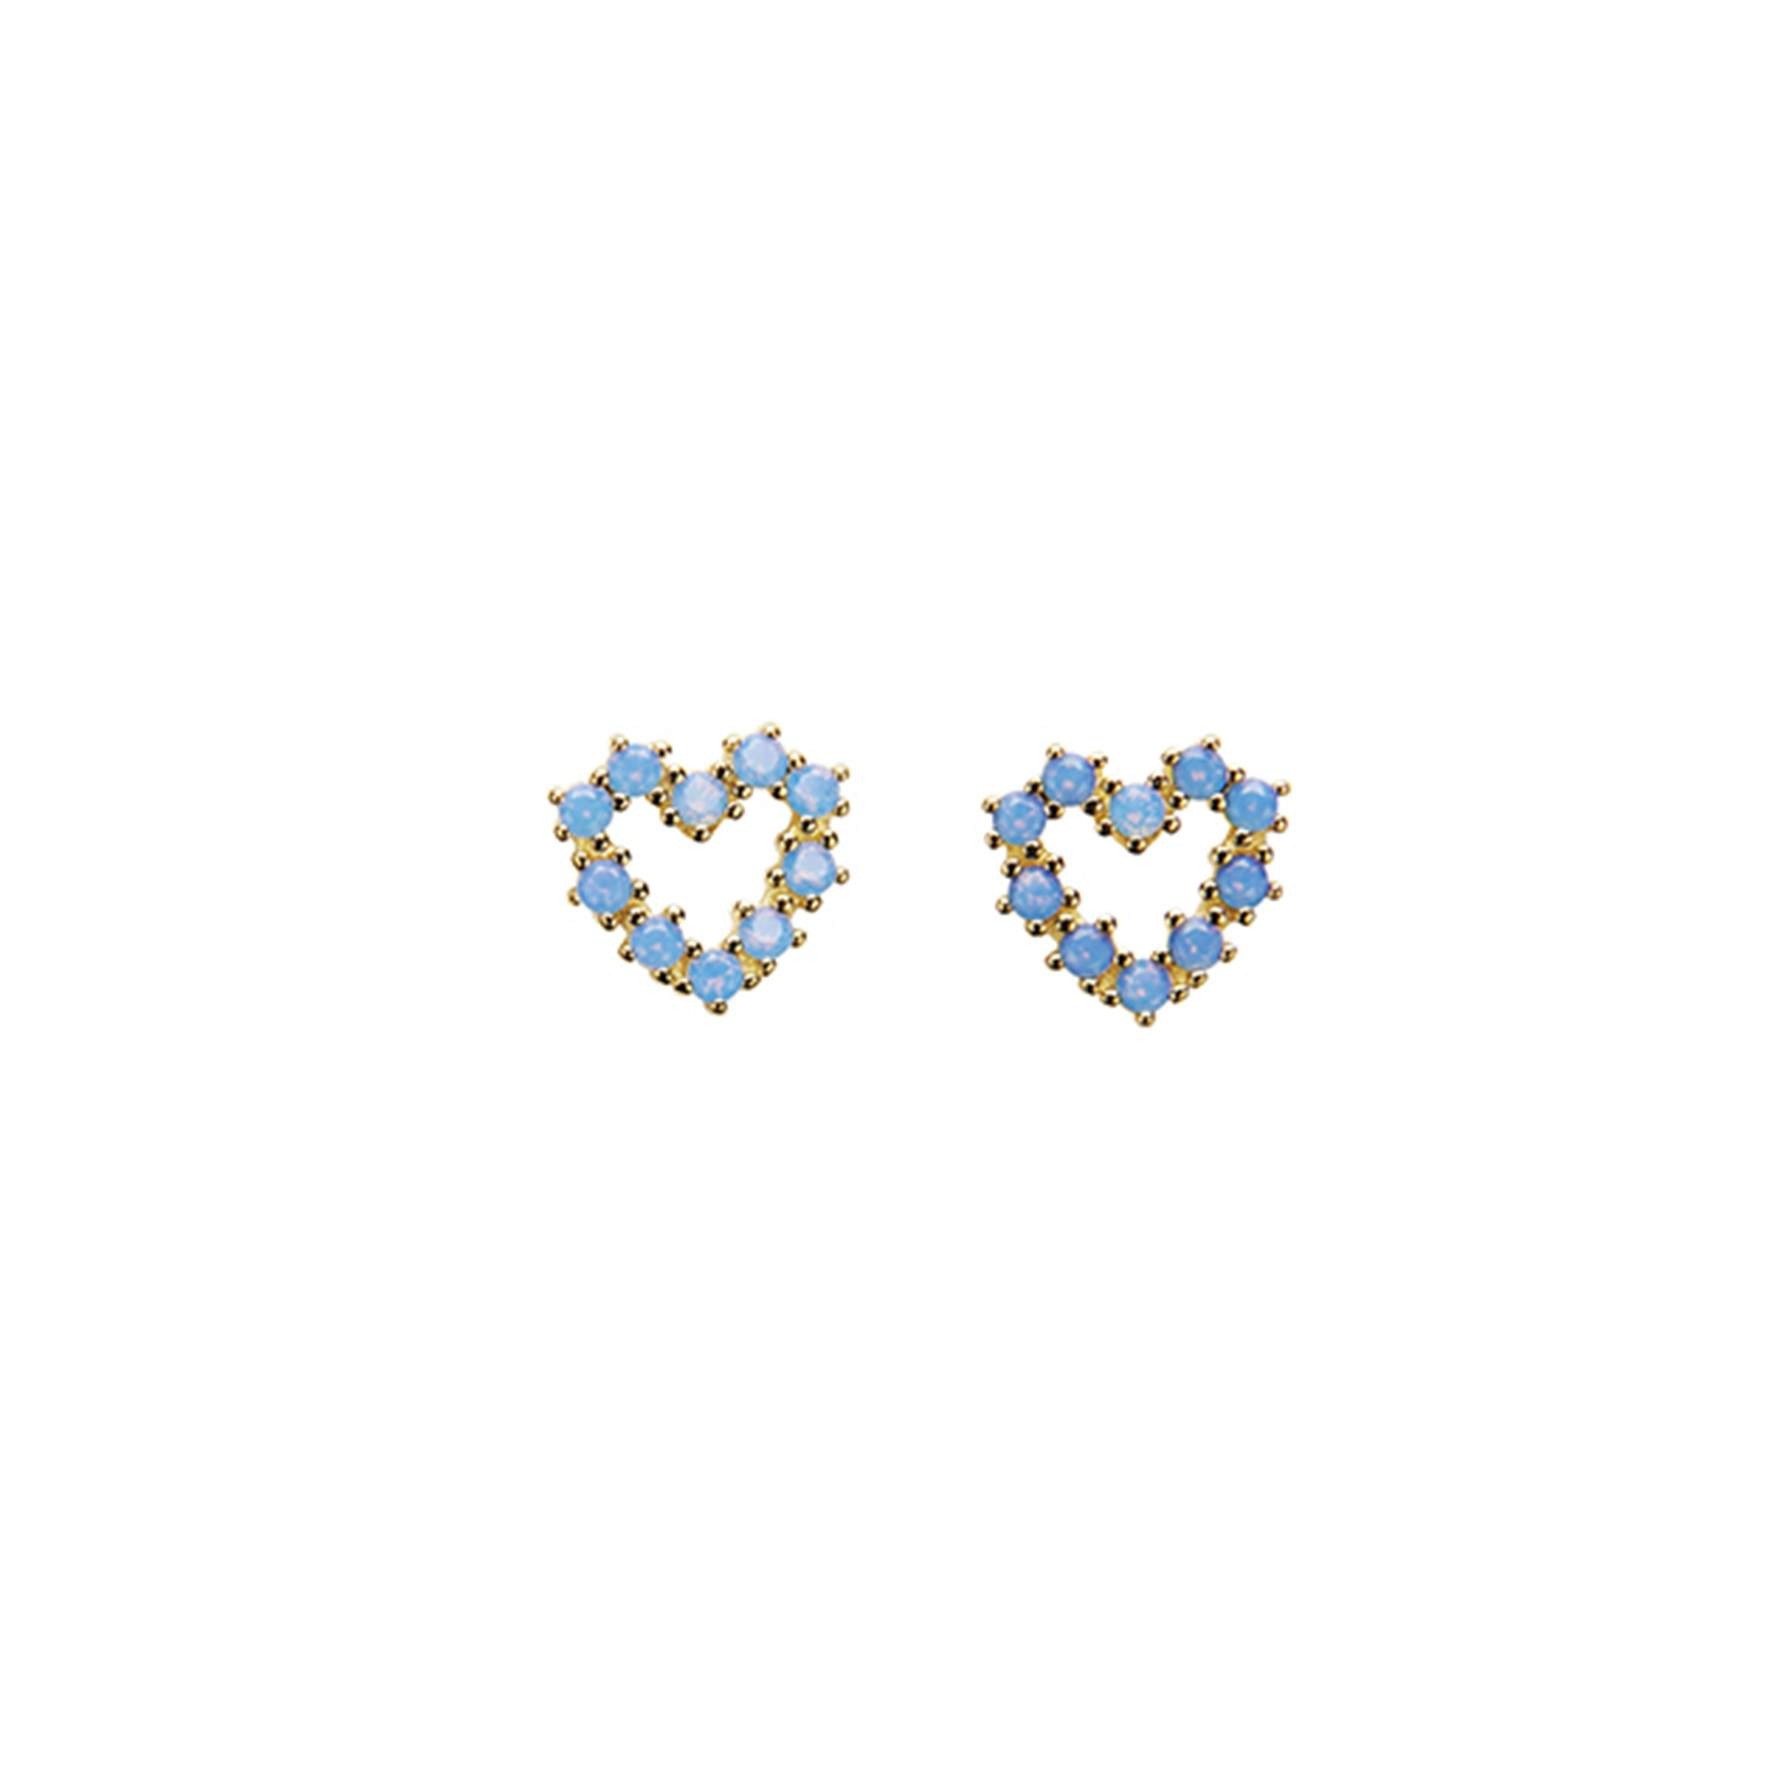 Cæur Crystal Stud Blue Opac from Pico in Goldplated-Silver Sterling 925